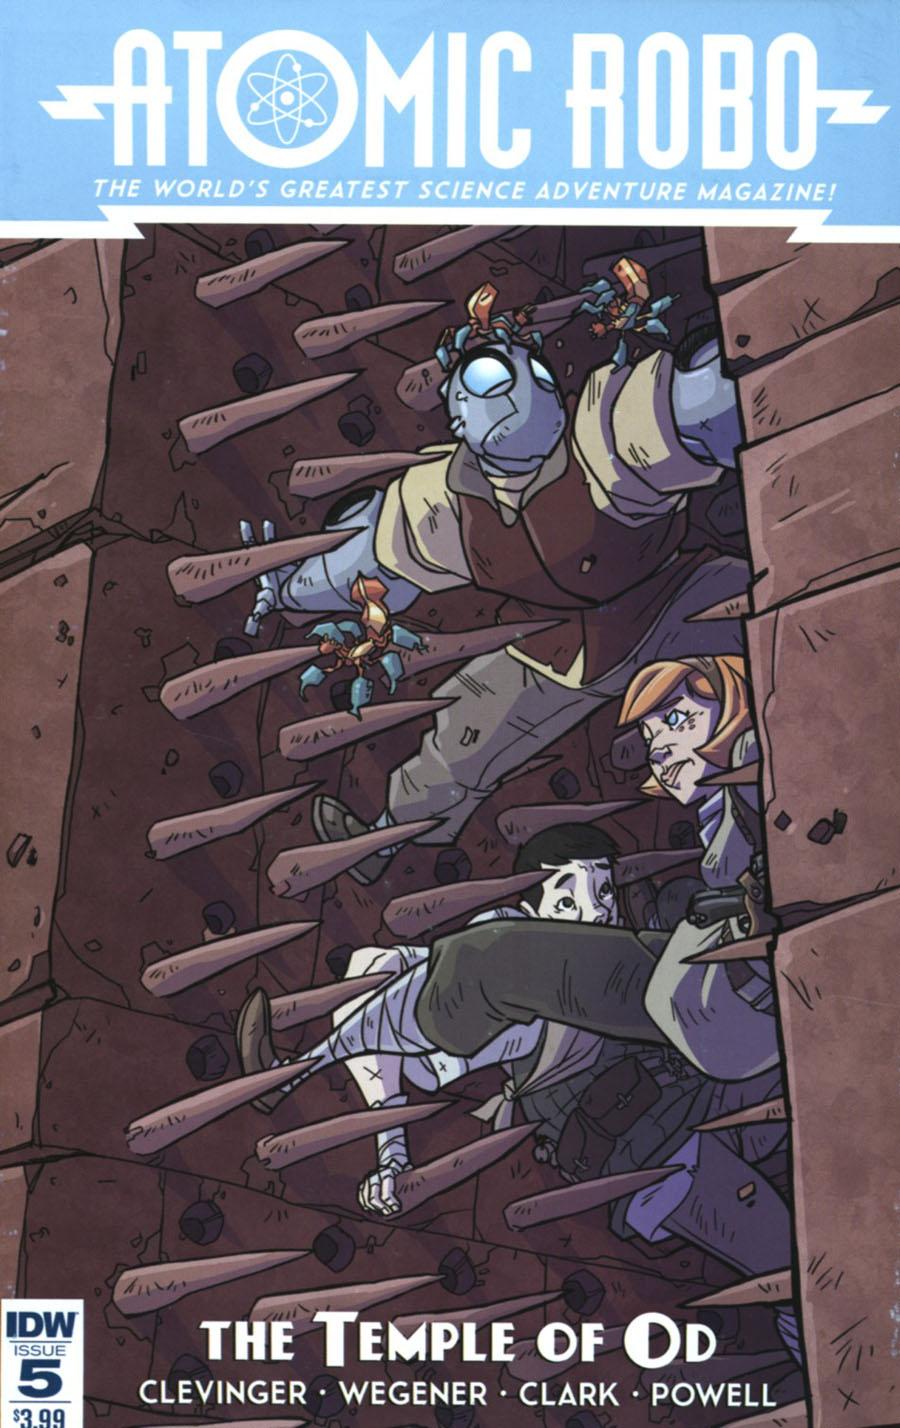 Atomic Robo And The Temple Of Od Vol. 1 #5